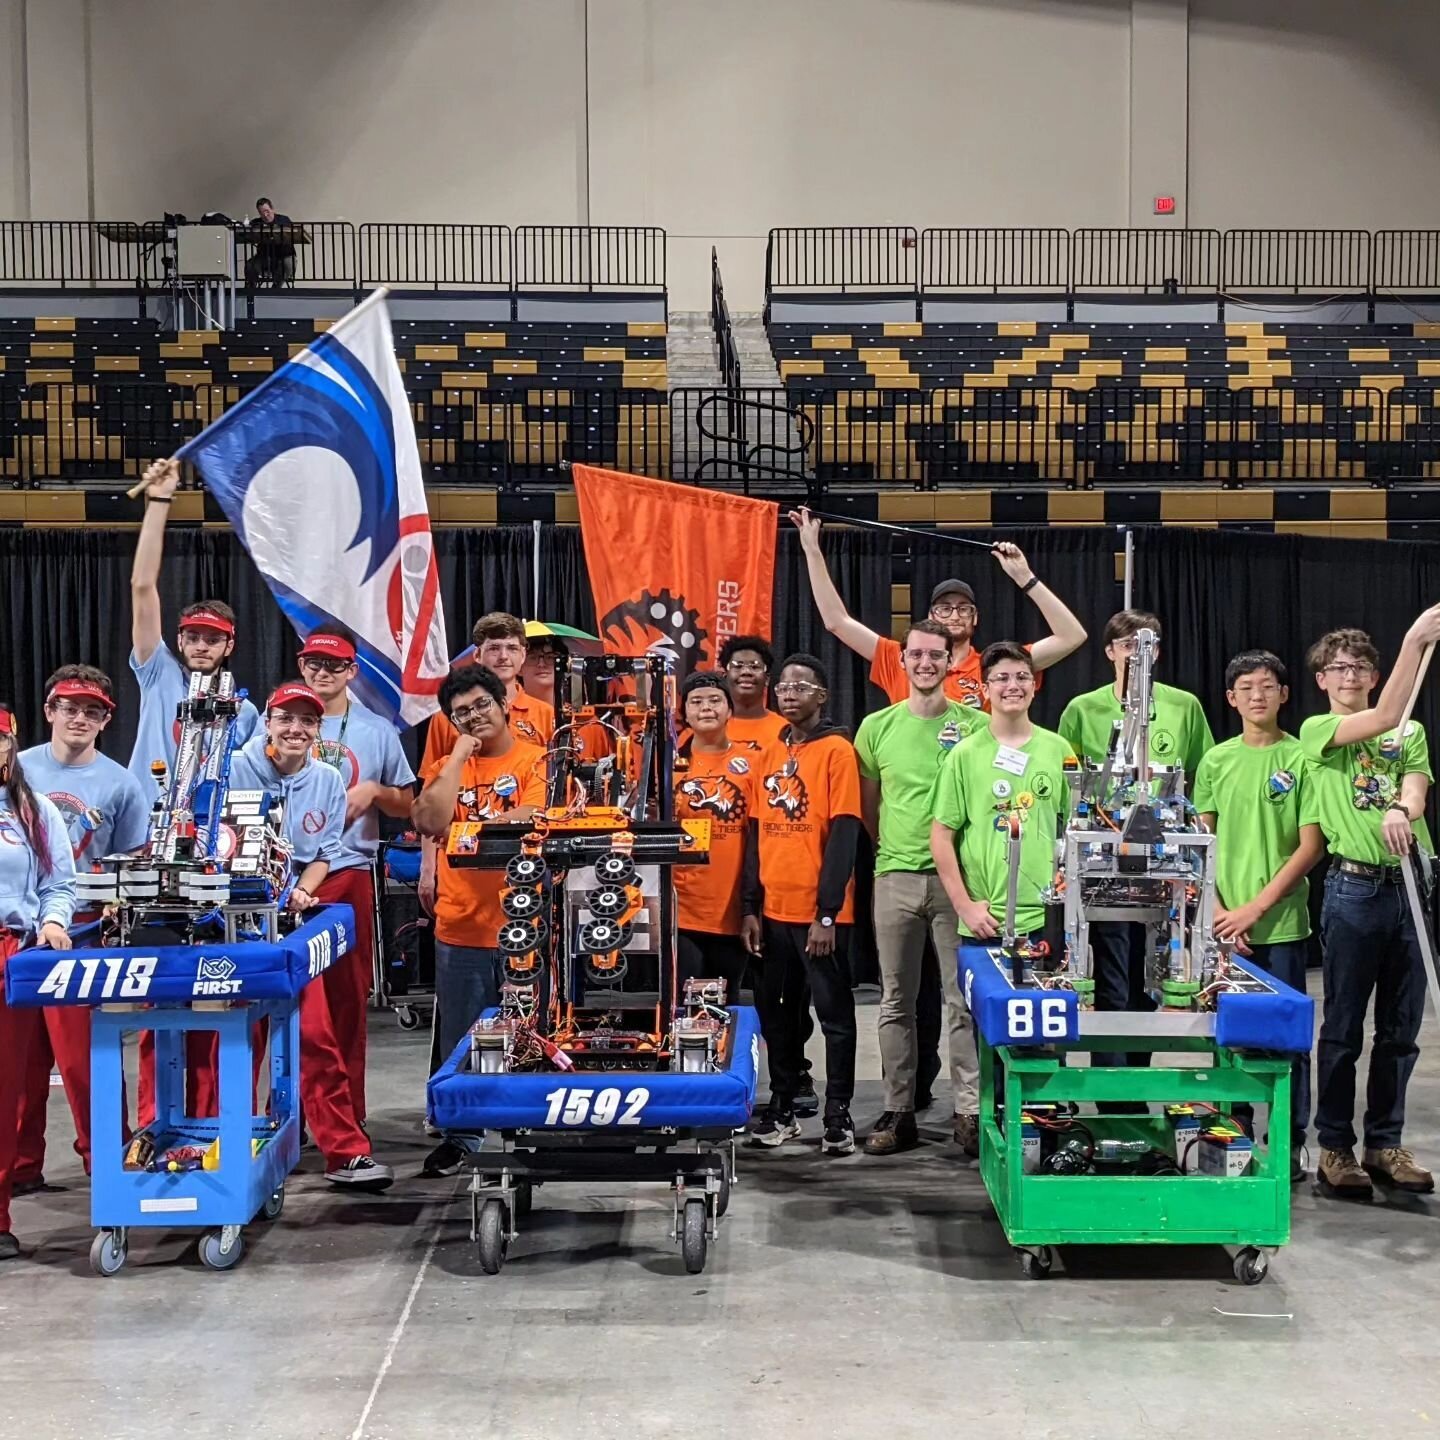 Congrats to team 4118 and 86 for placing 3rd overall at the #orlandofrc regional. #bionictigers #frc1592 #firstrobotics. Stay tuned for our upcoming appearance at the #bayouregional #firstinlouisiana